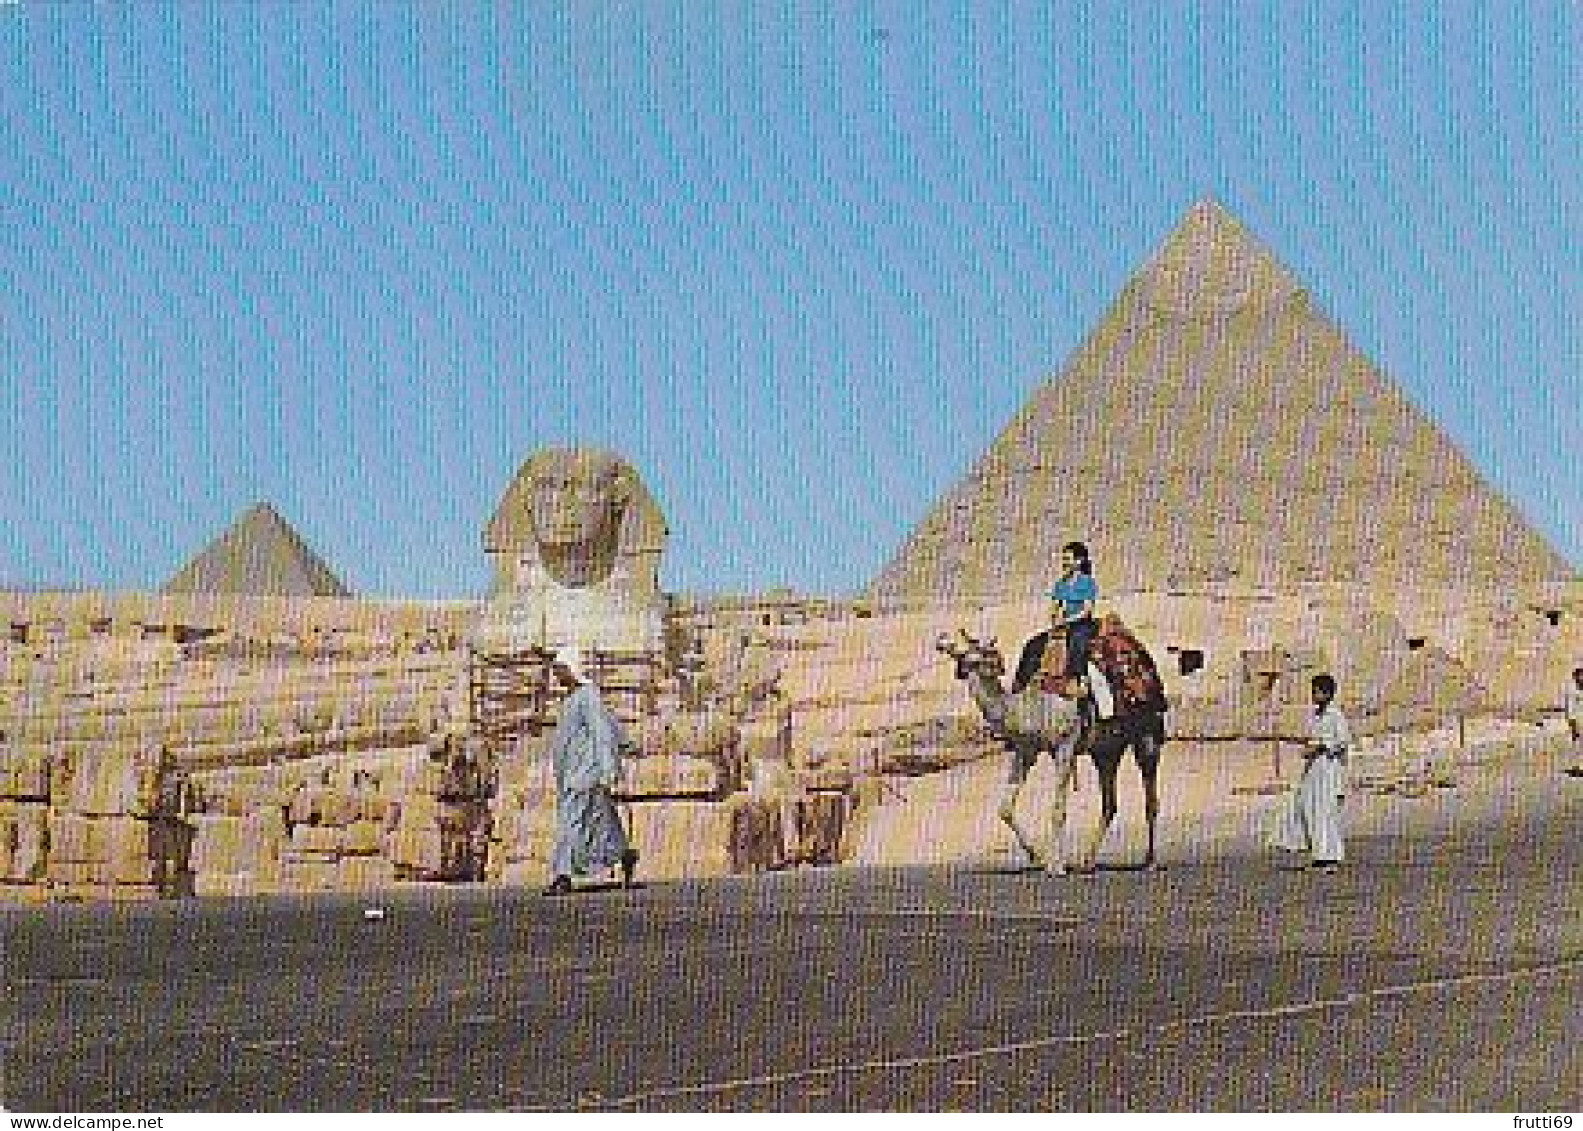 AK 171816 EGYPT - Giza - The Great Sphinx And Khefreh Pyramid - Sphinx